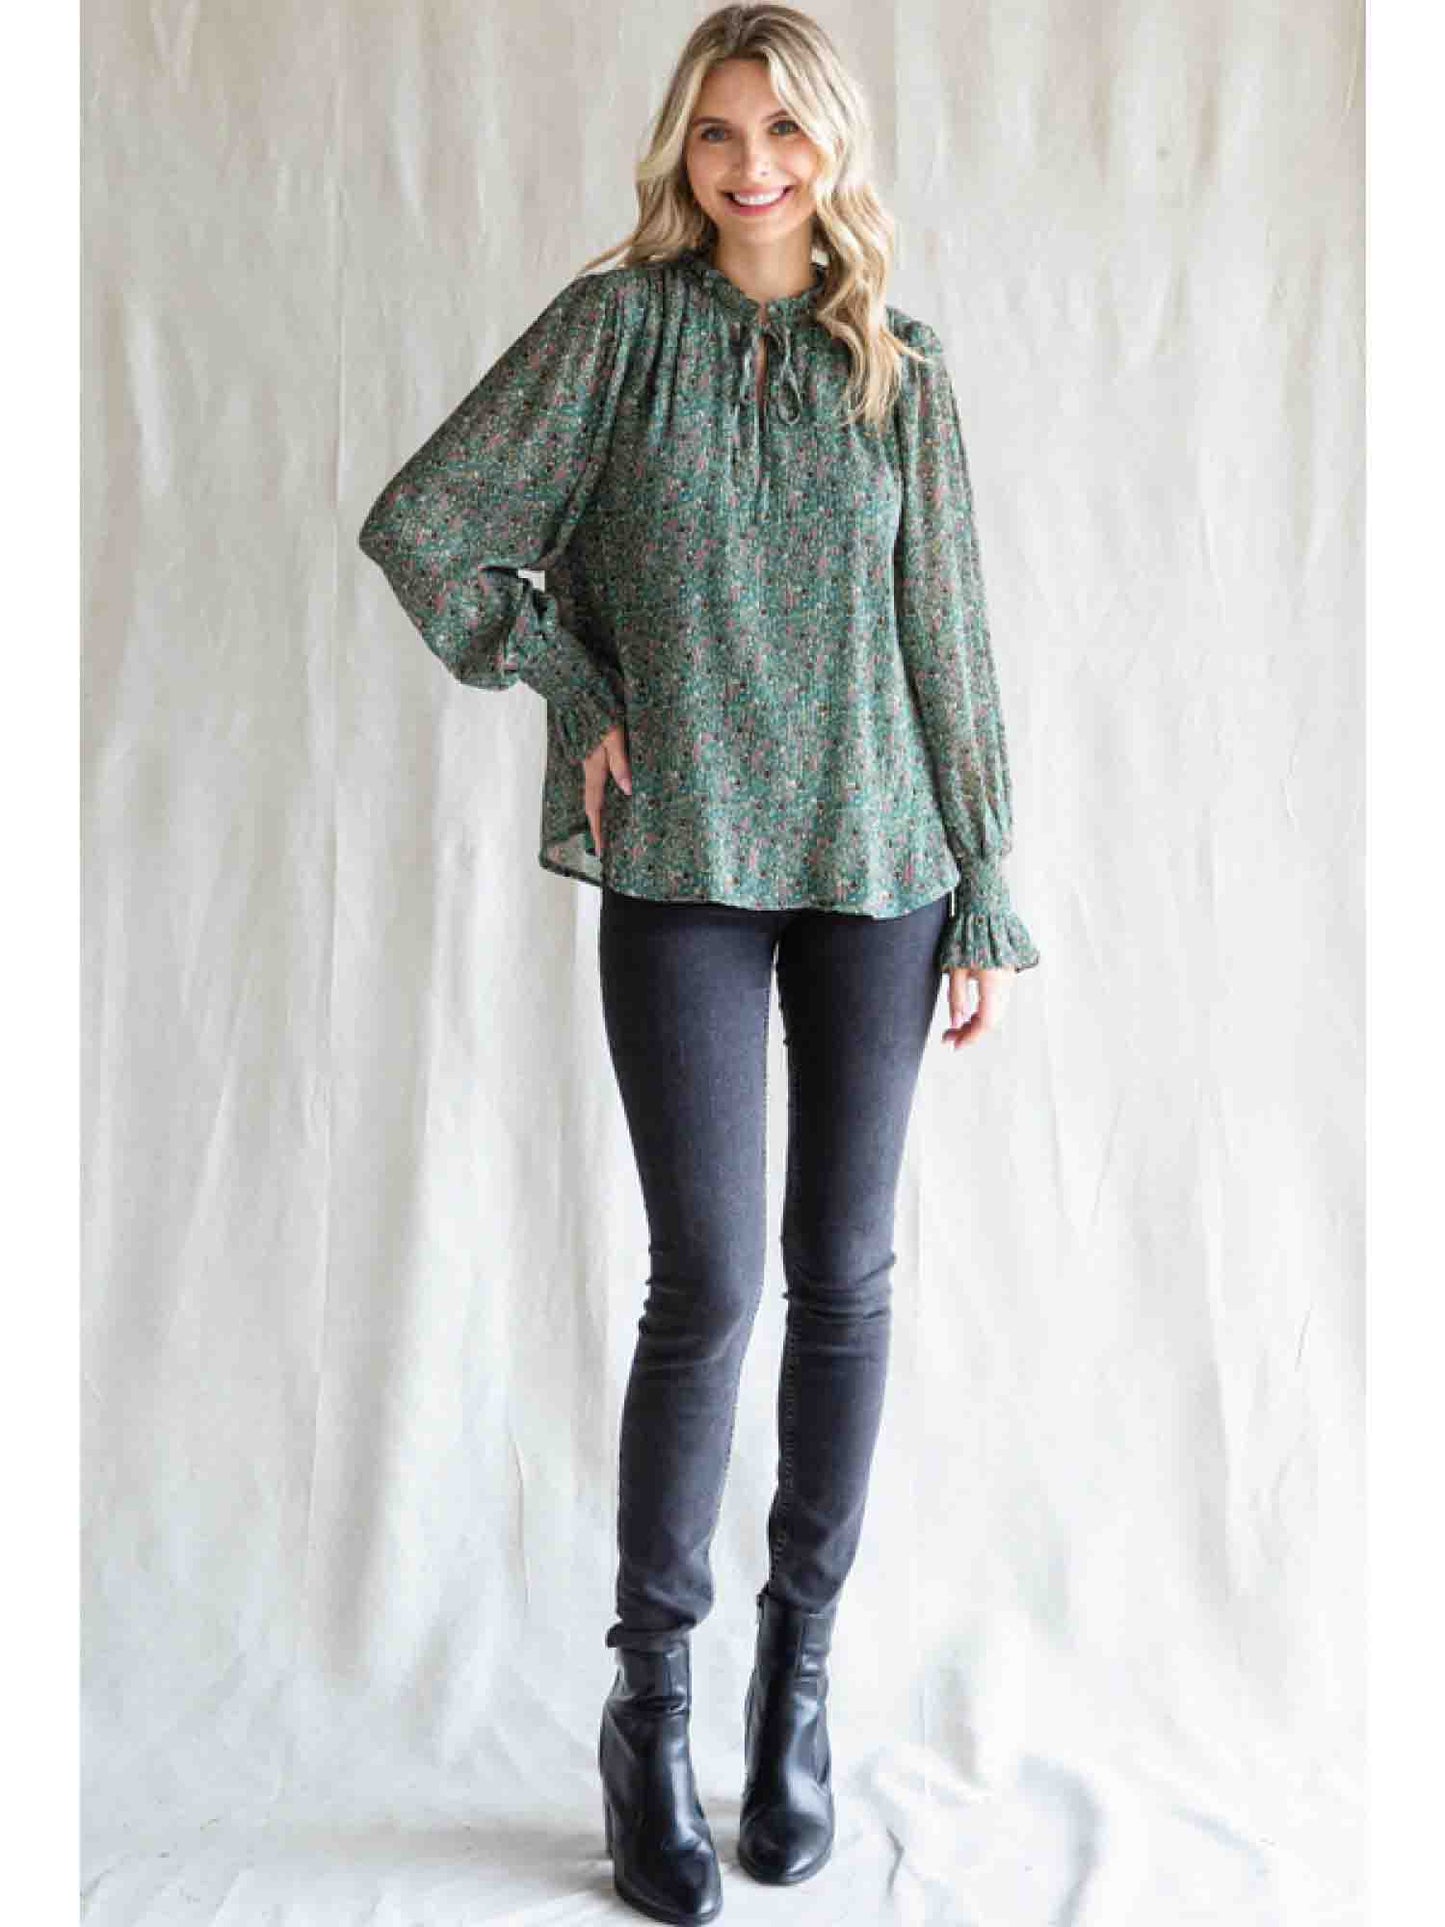 Textured Print Chiffon Top with Poet Sleeves in Hunter Green by Jodifl